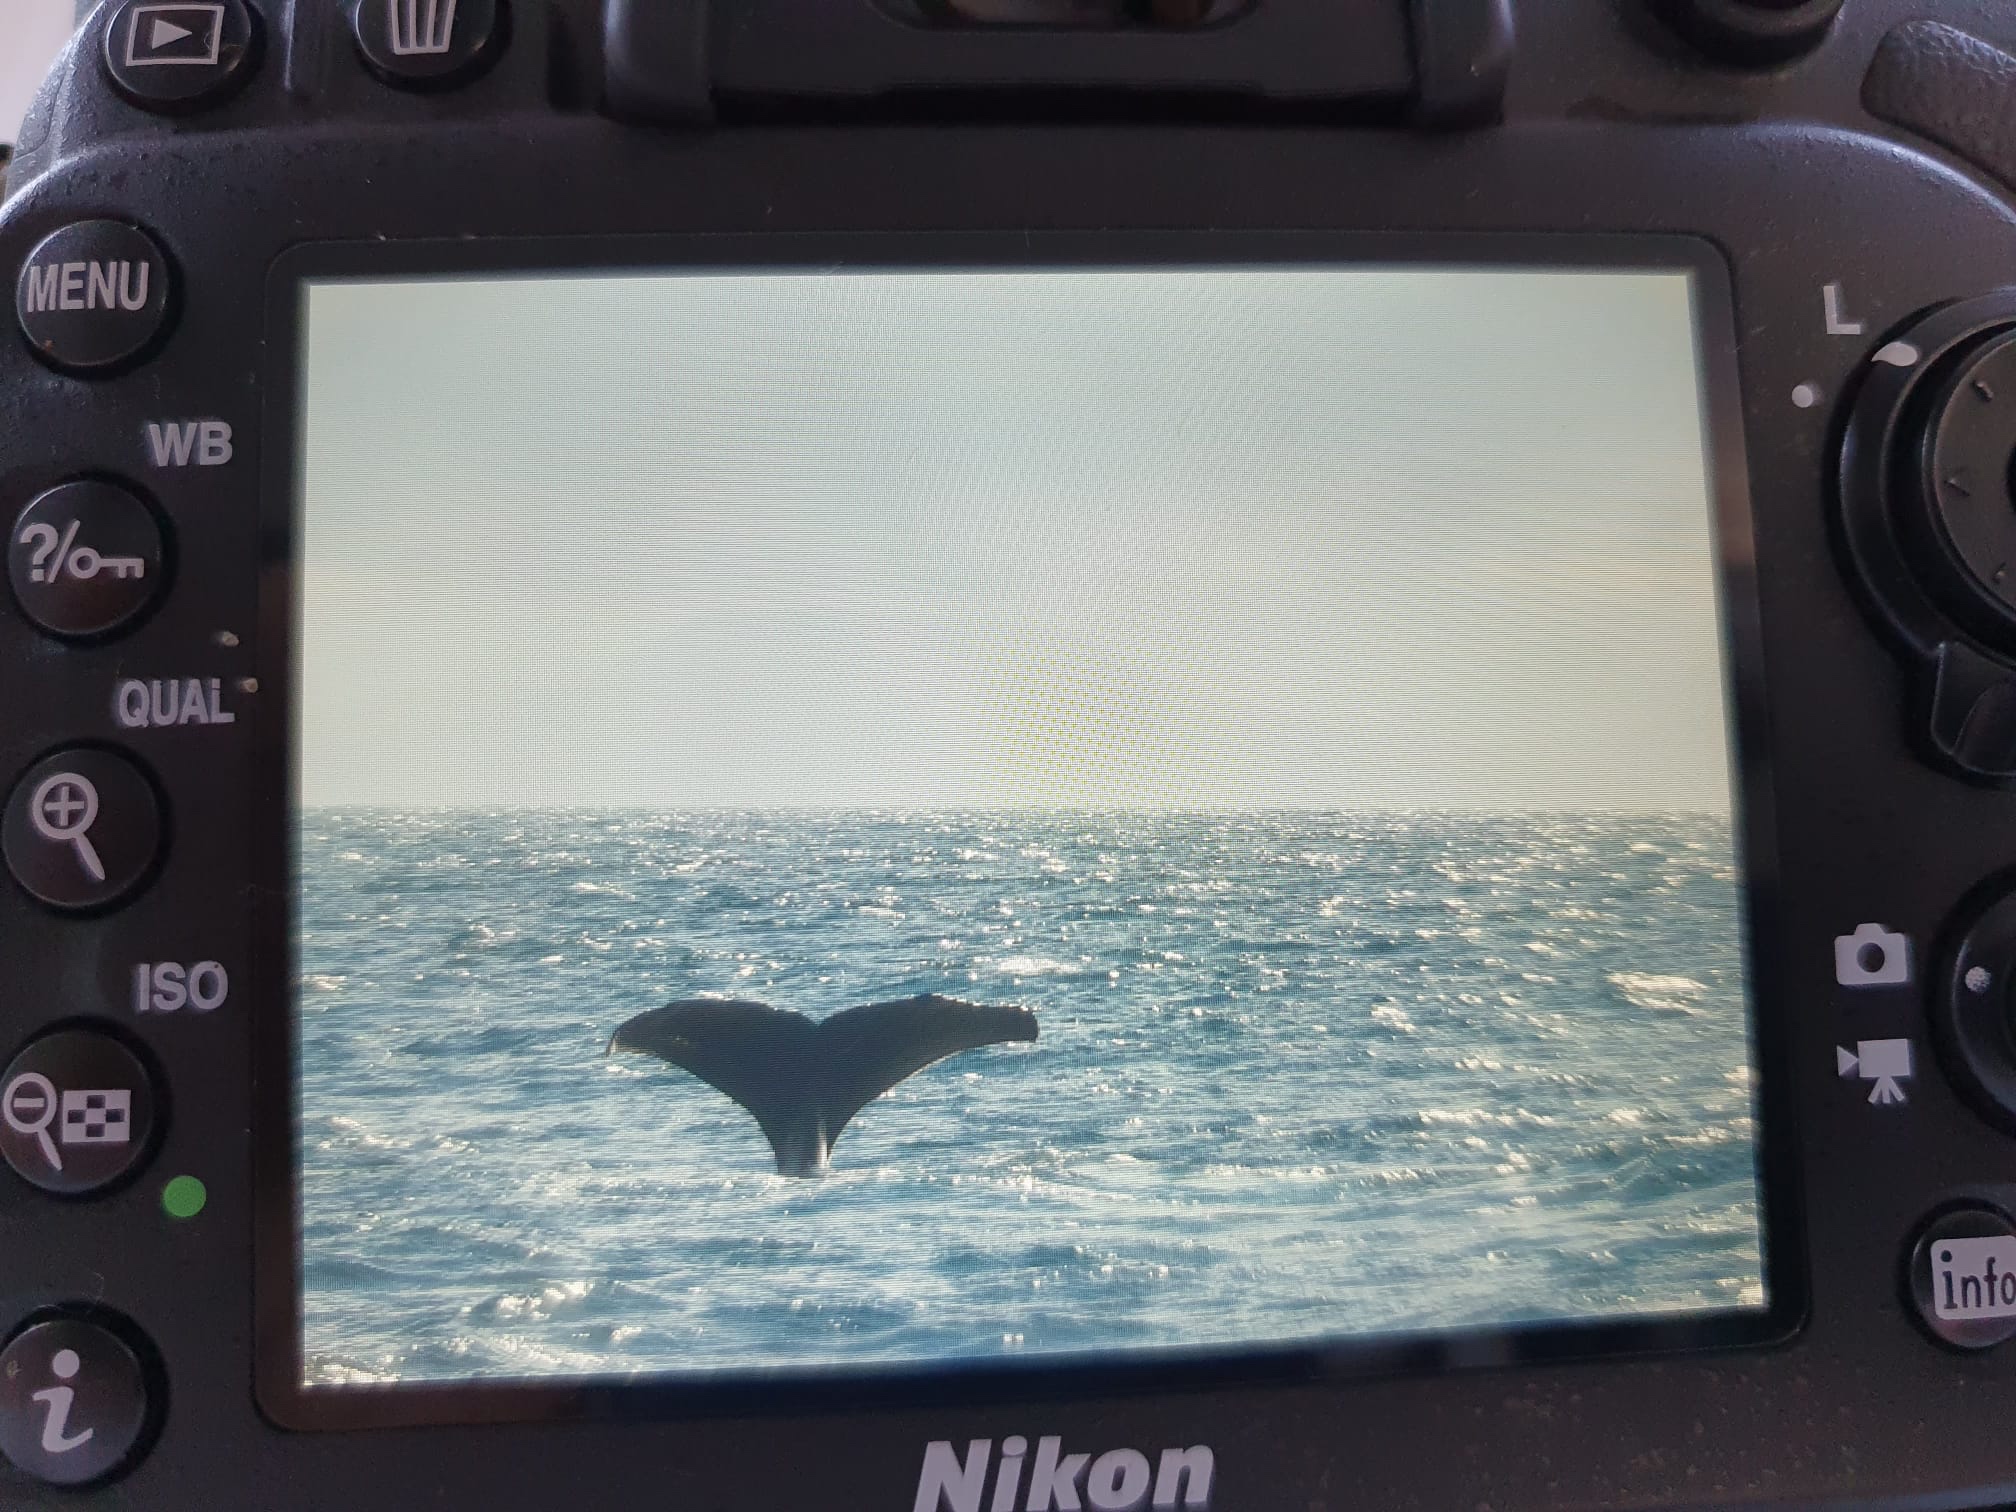 Tag 9: Stave – Whale Watching Andenes – Andøy Friluftssenter